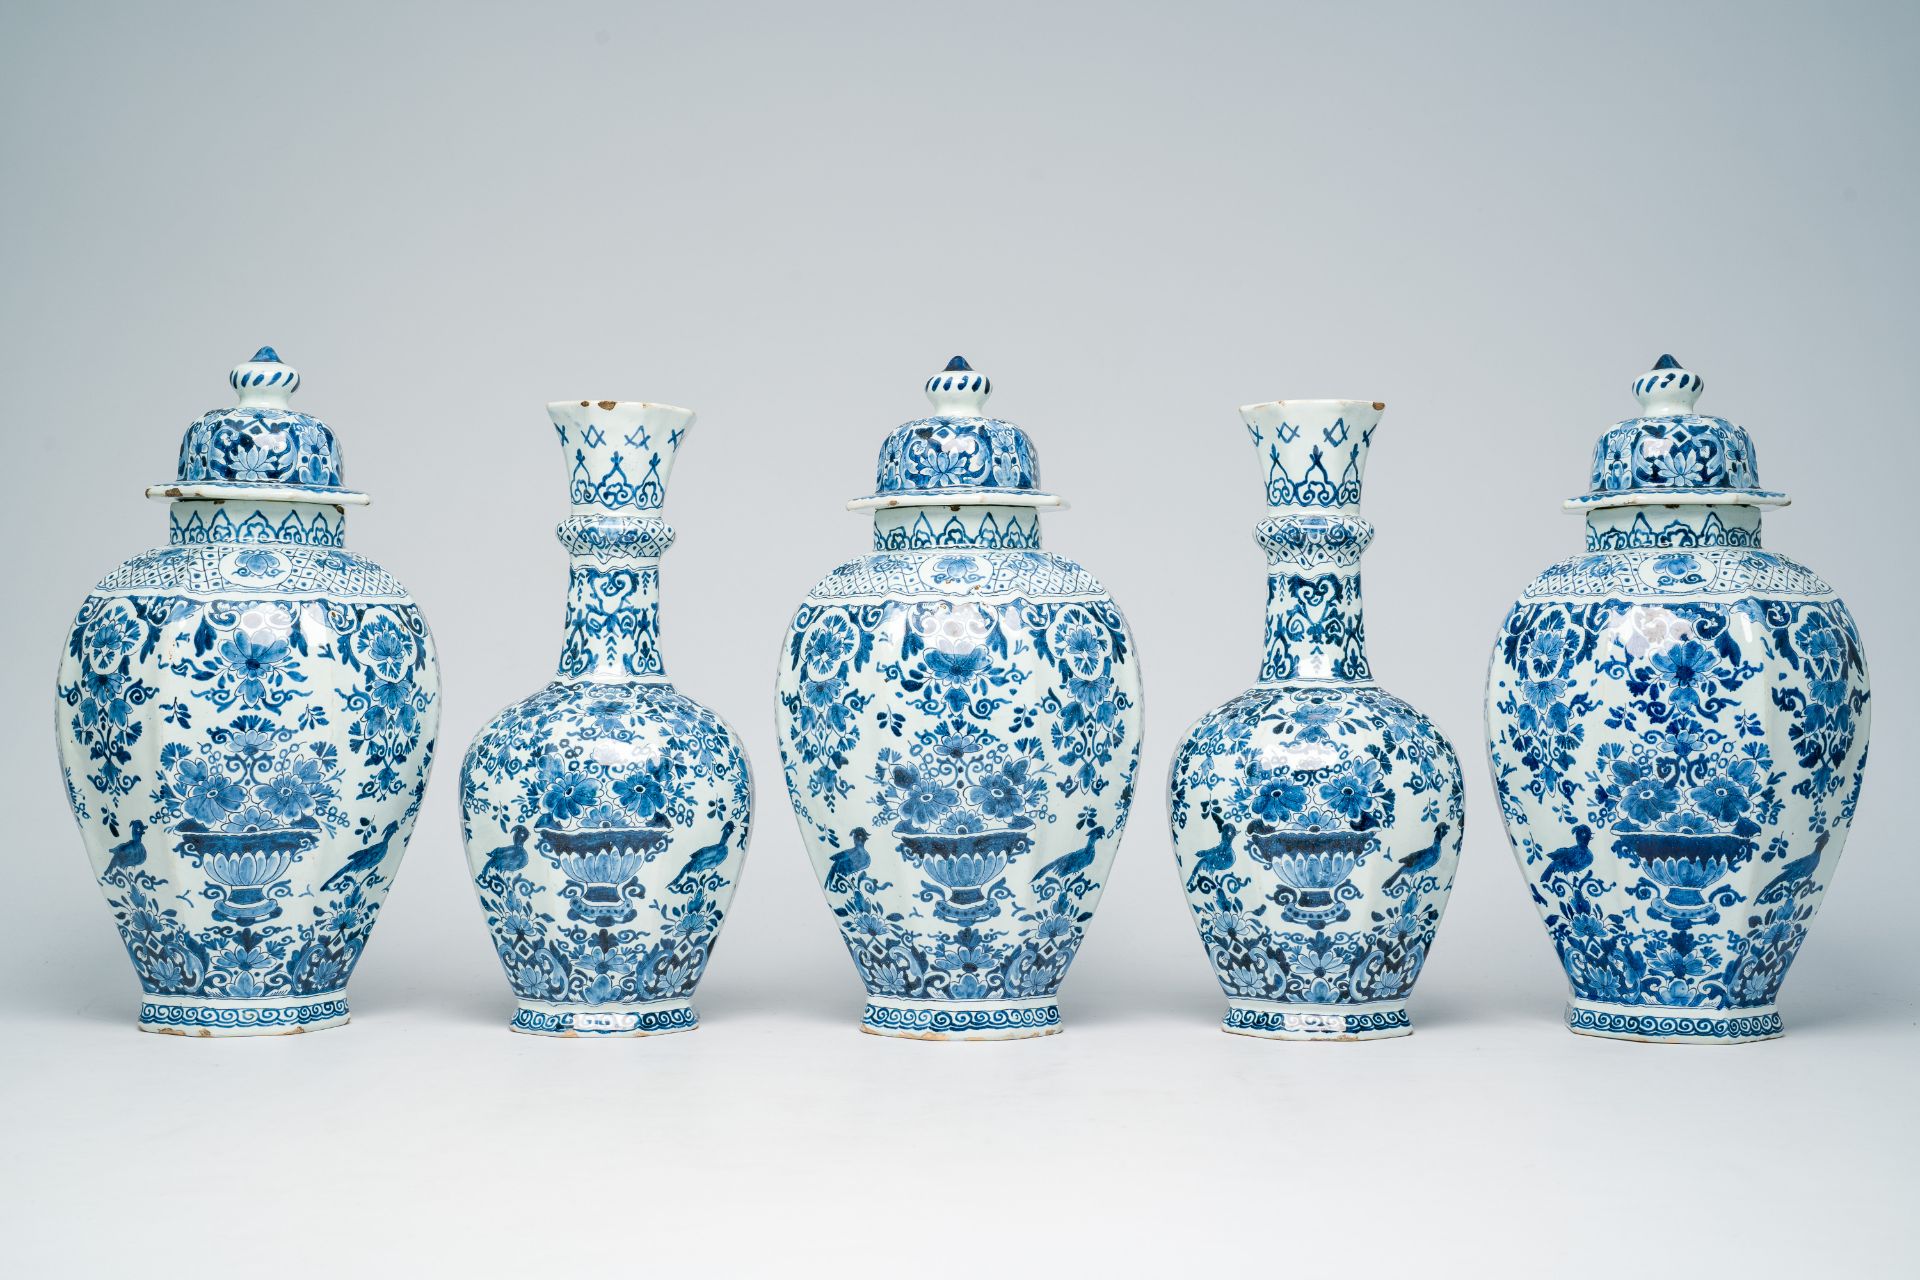 A Dutch Delft blue and white five-piece vase garniture with flower baskets and birds among blossomin - Image 4 of 8